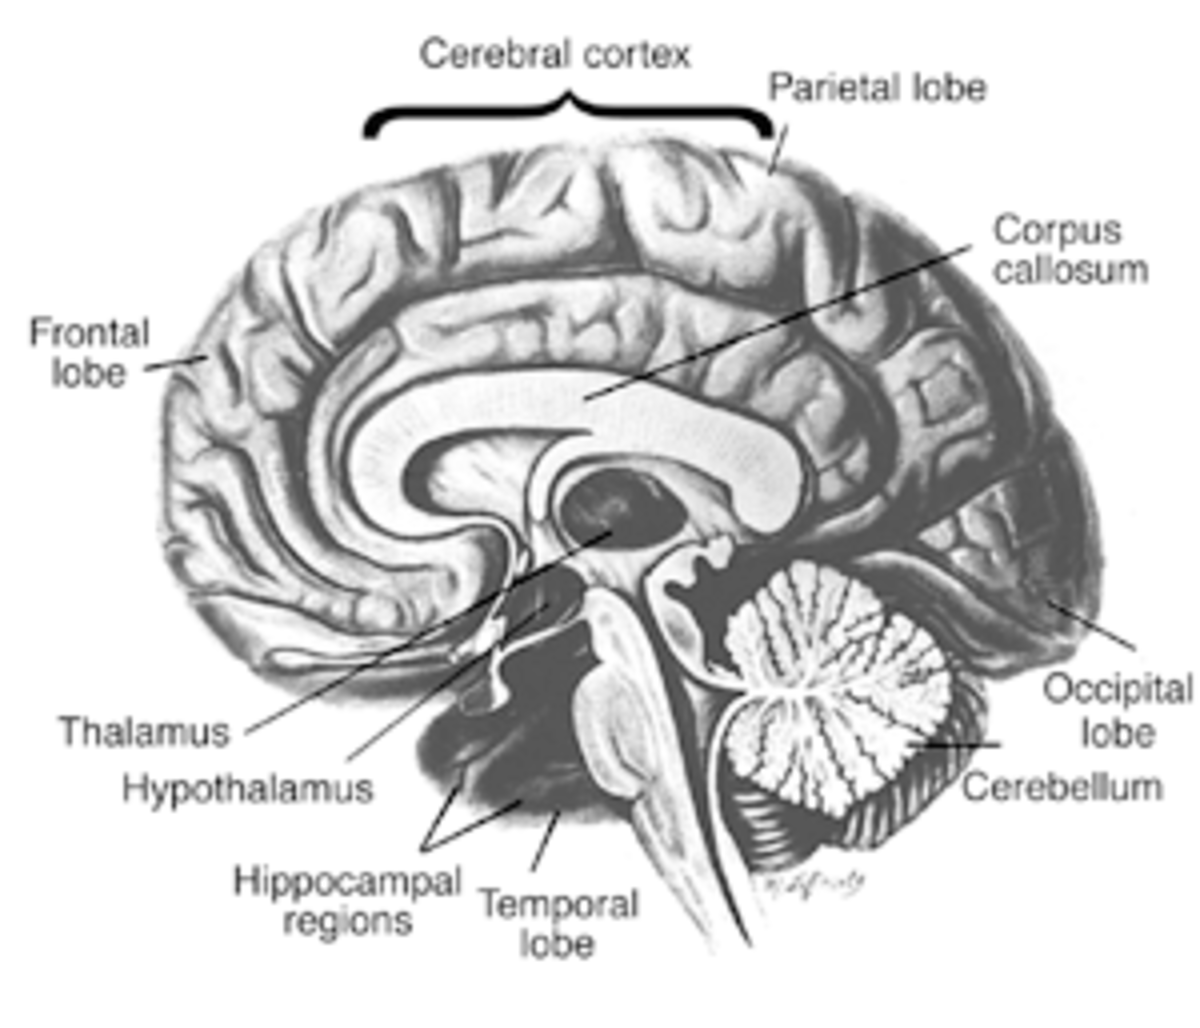 Schematic drawing of the human brain, showing regions vulnerable to alcoholism-related abnormalities.